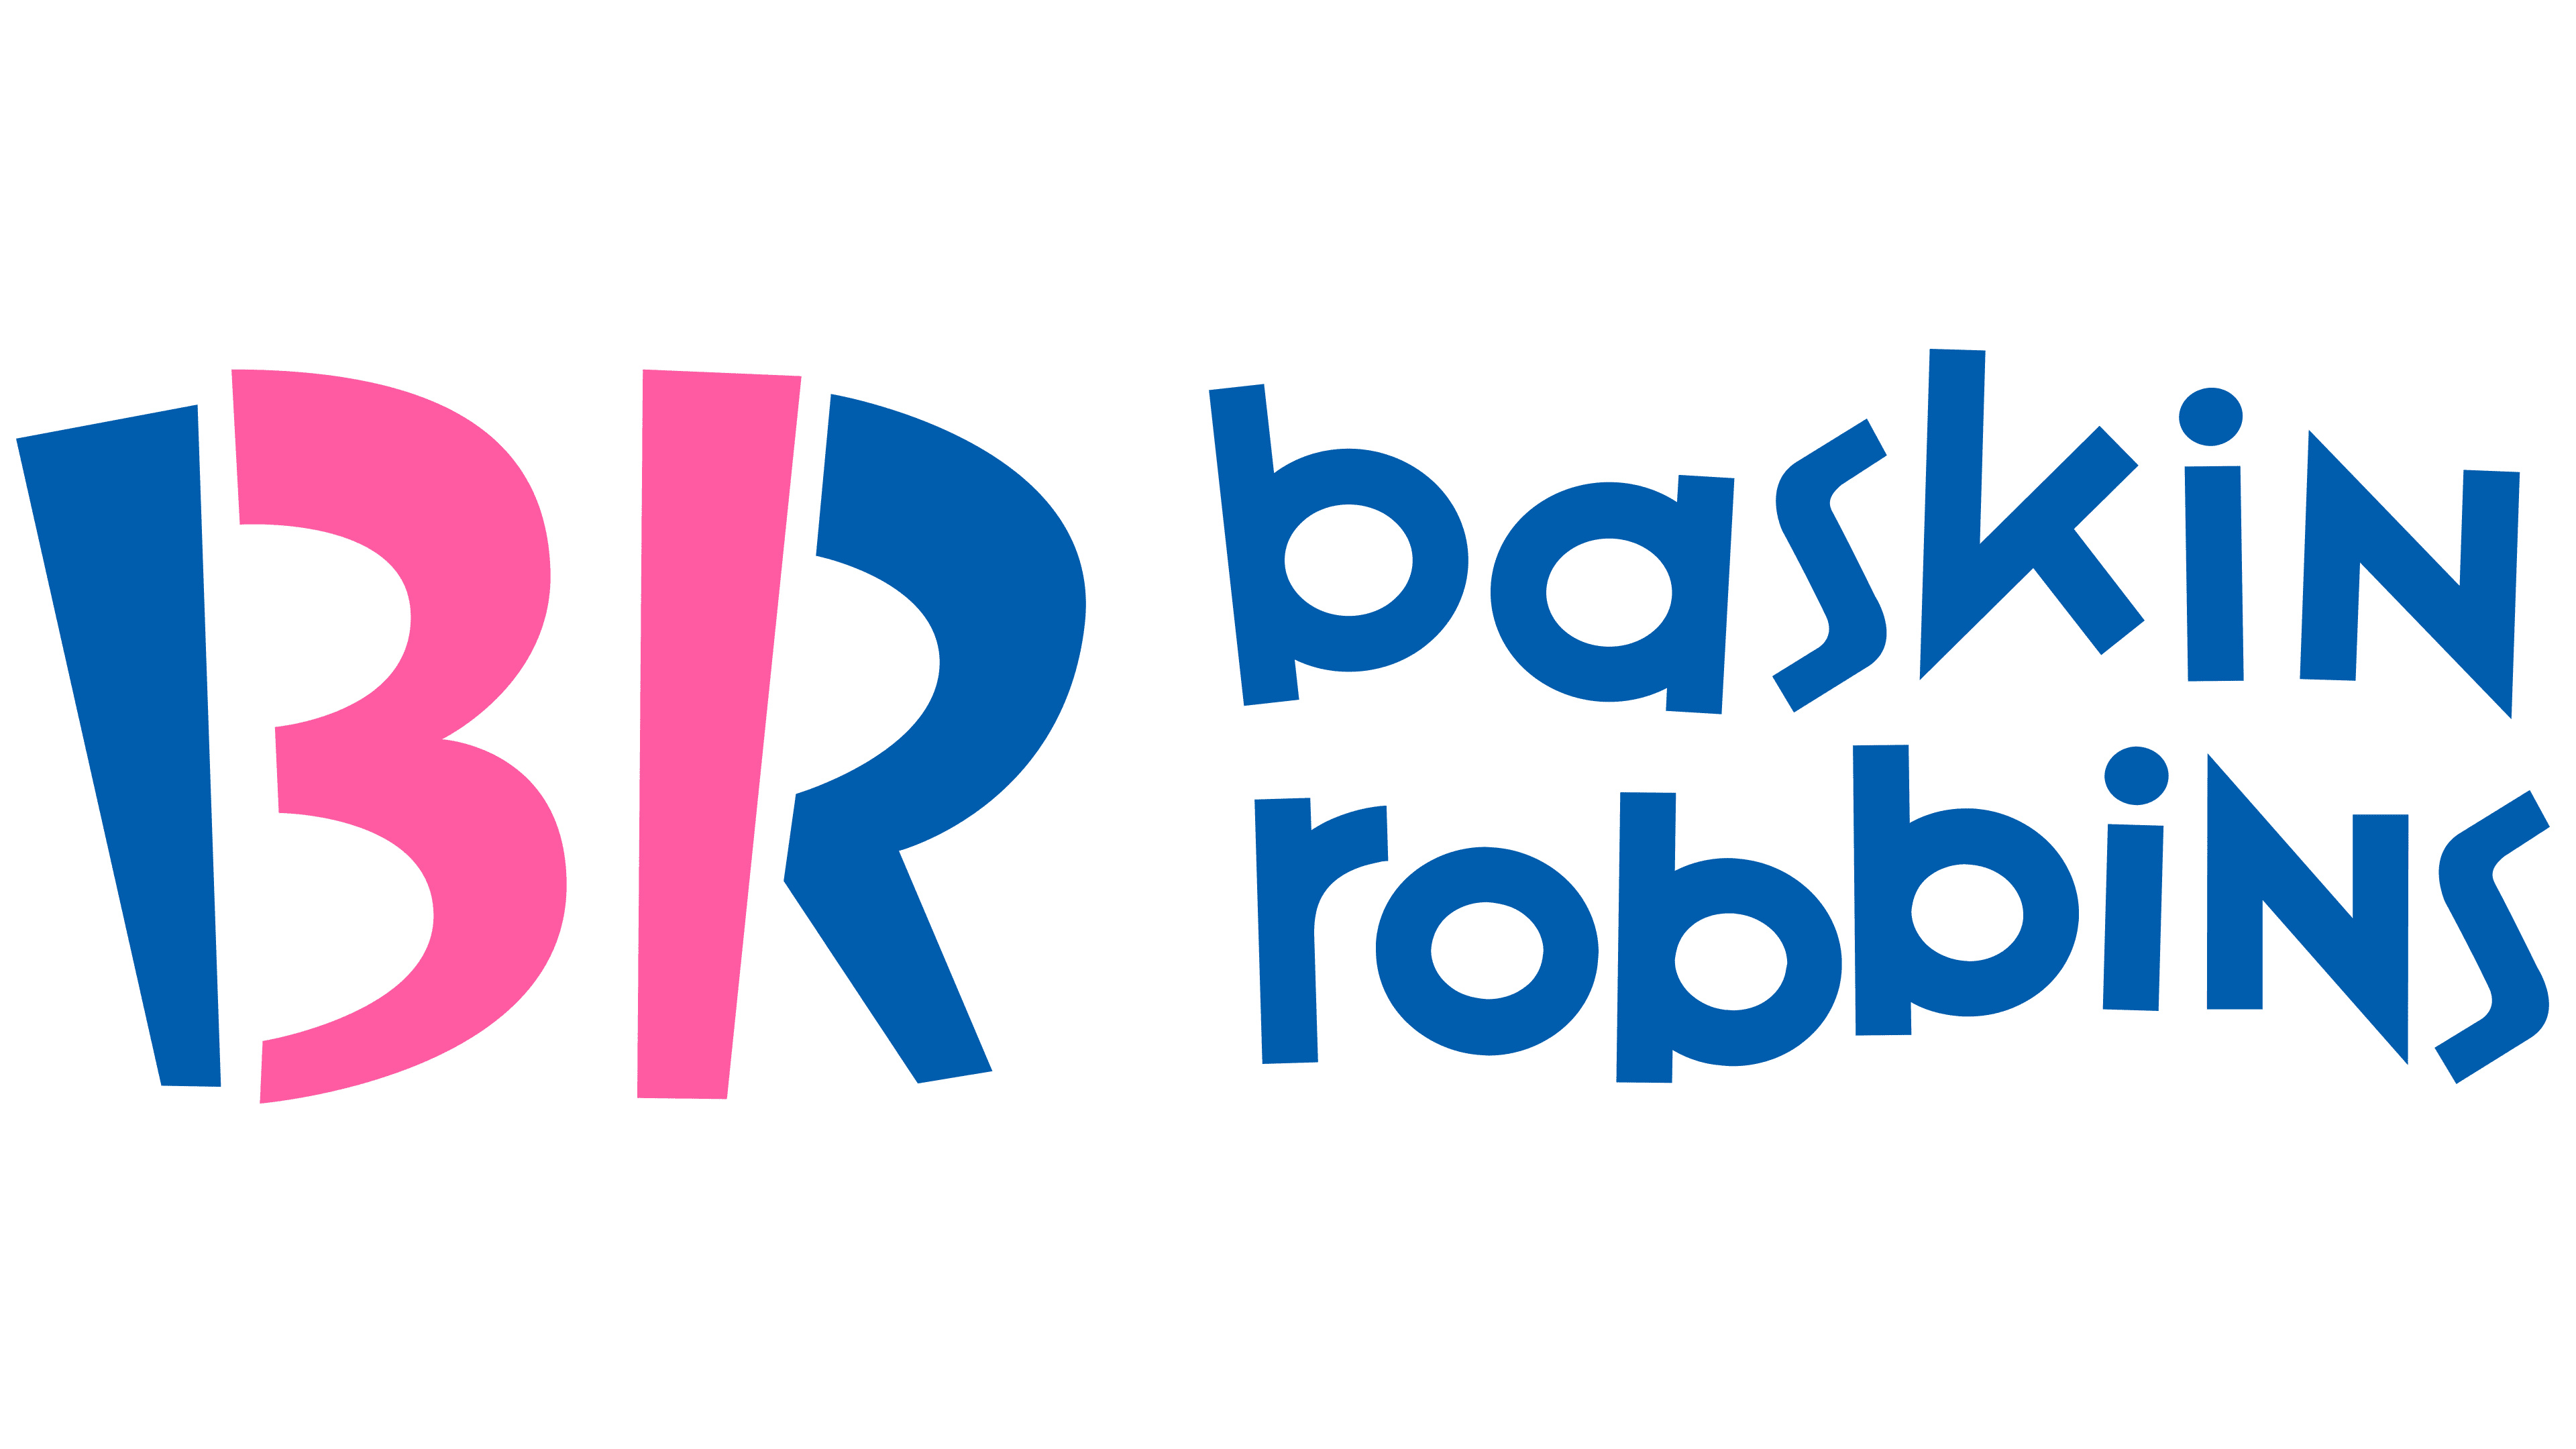 Baskin Robbins: An American multinational chain of ice cream, Owned by Inspire Brands. 3840x2160 4K Wallpaper.